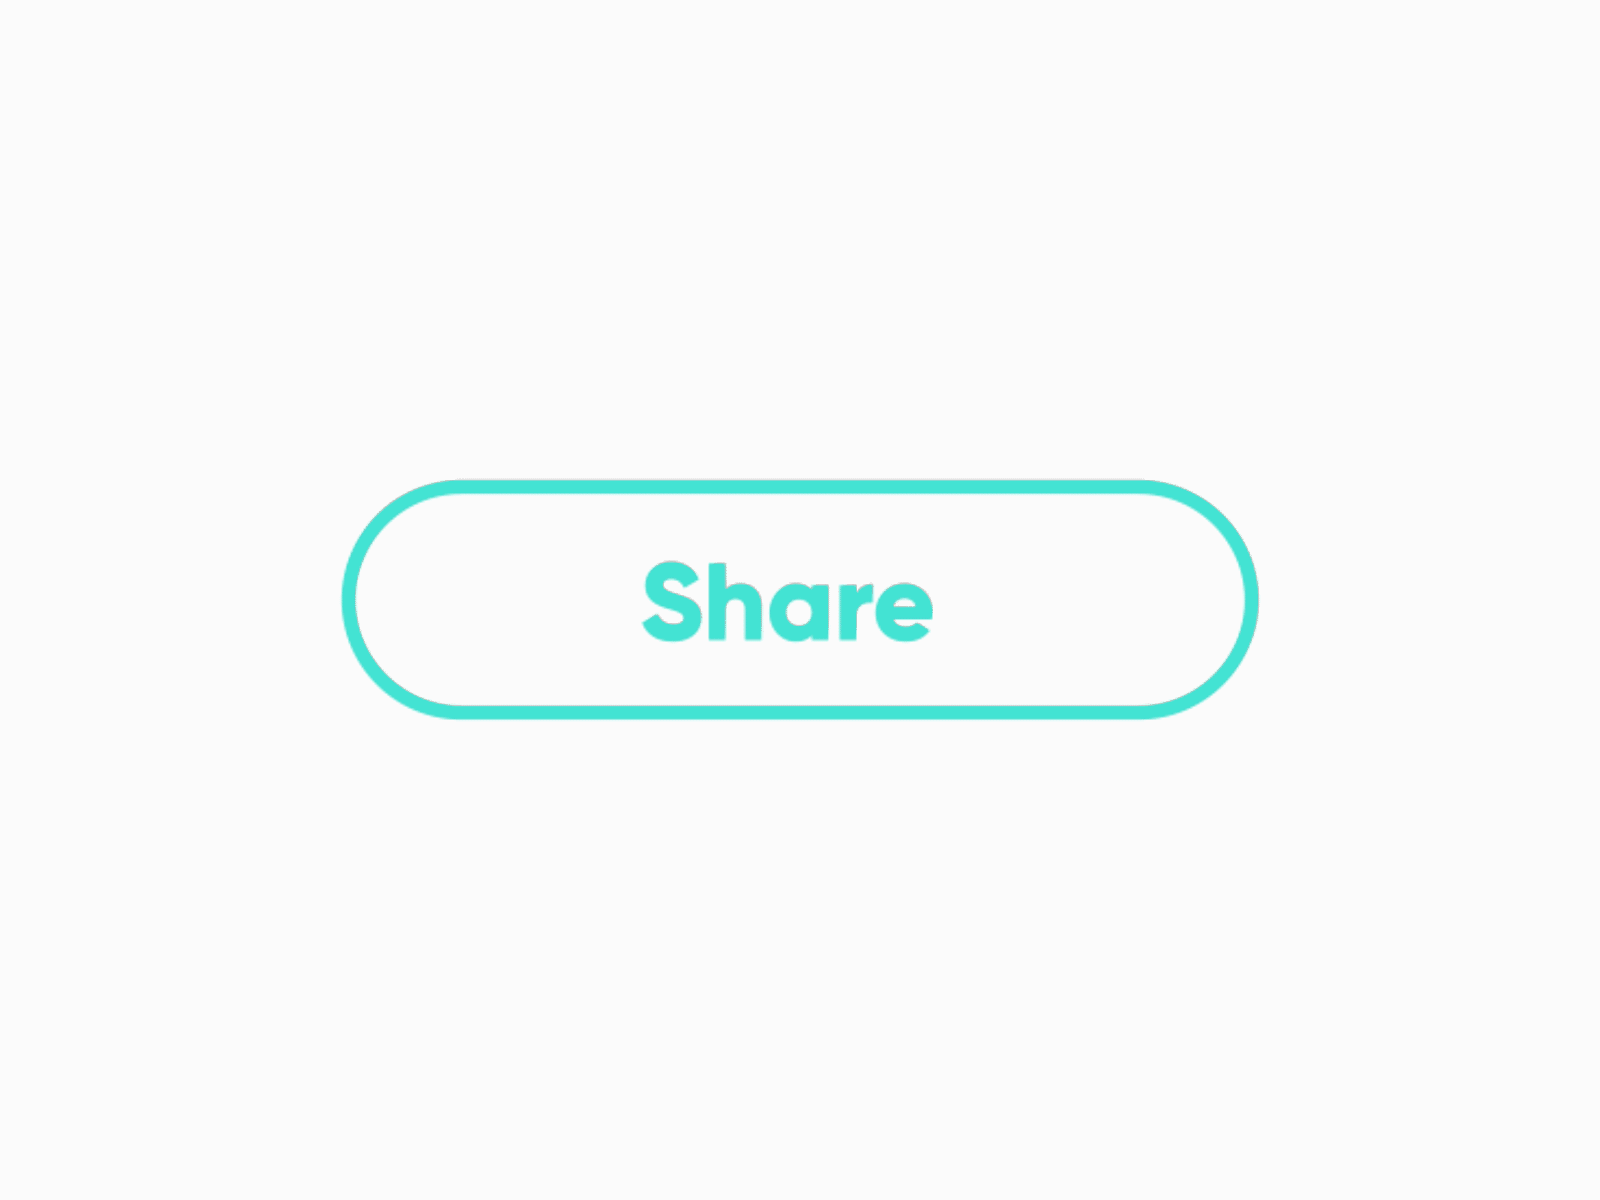 Share Button Animation